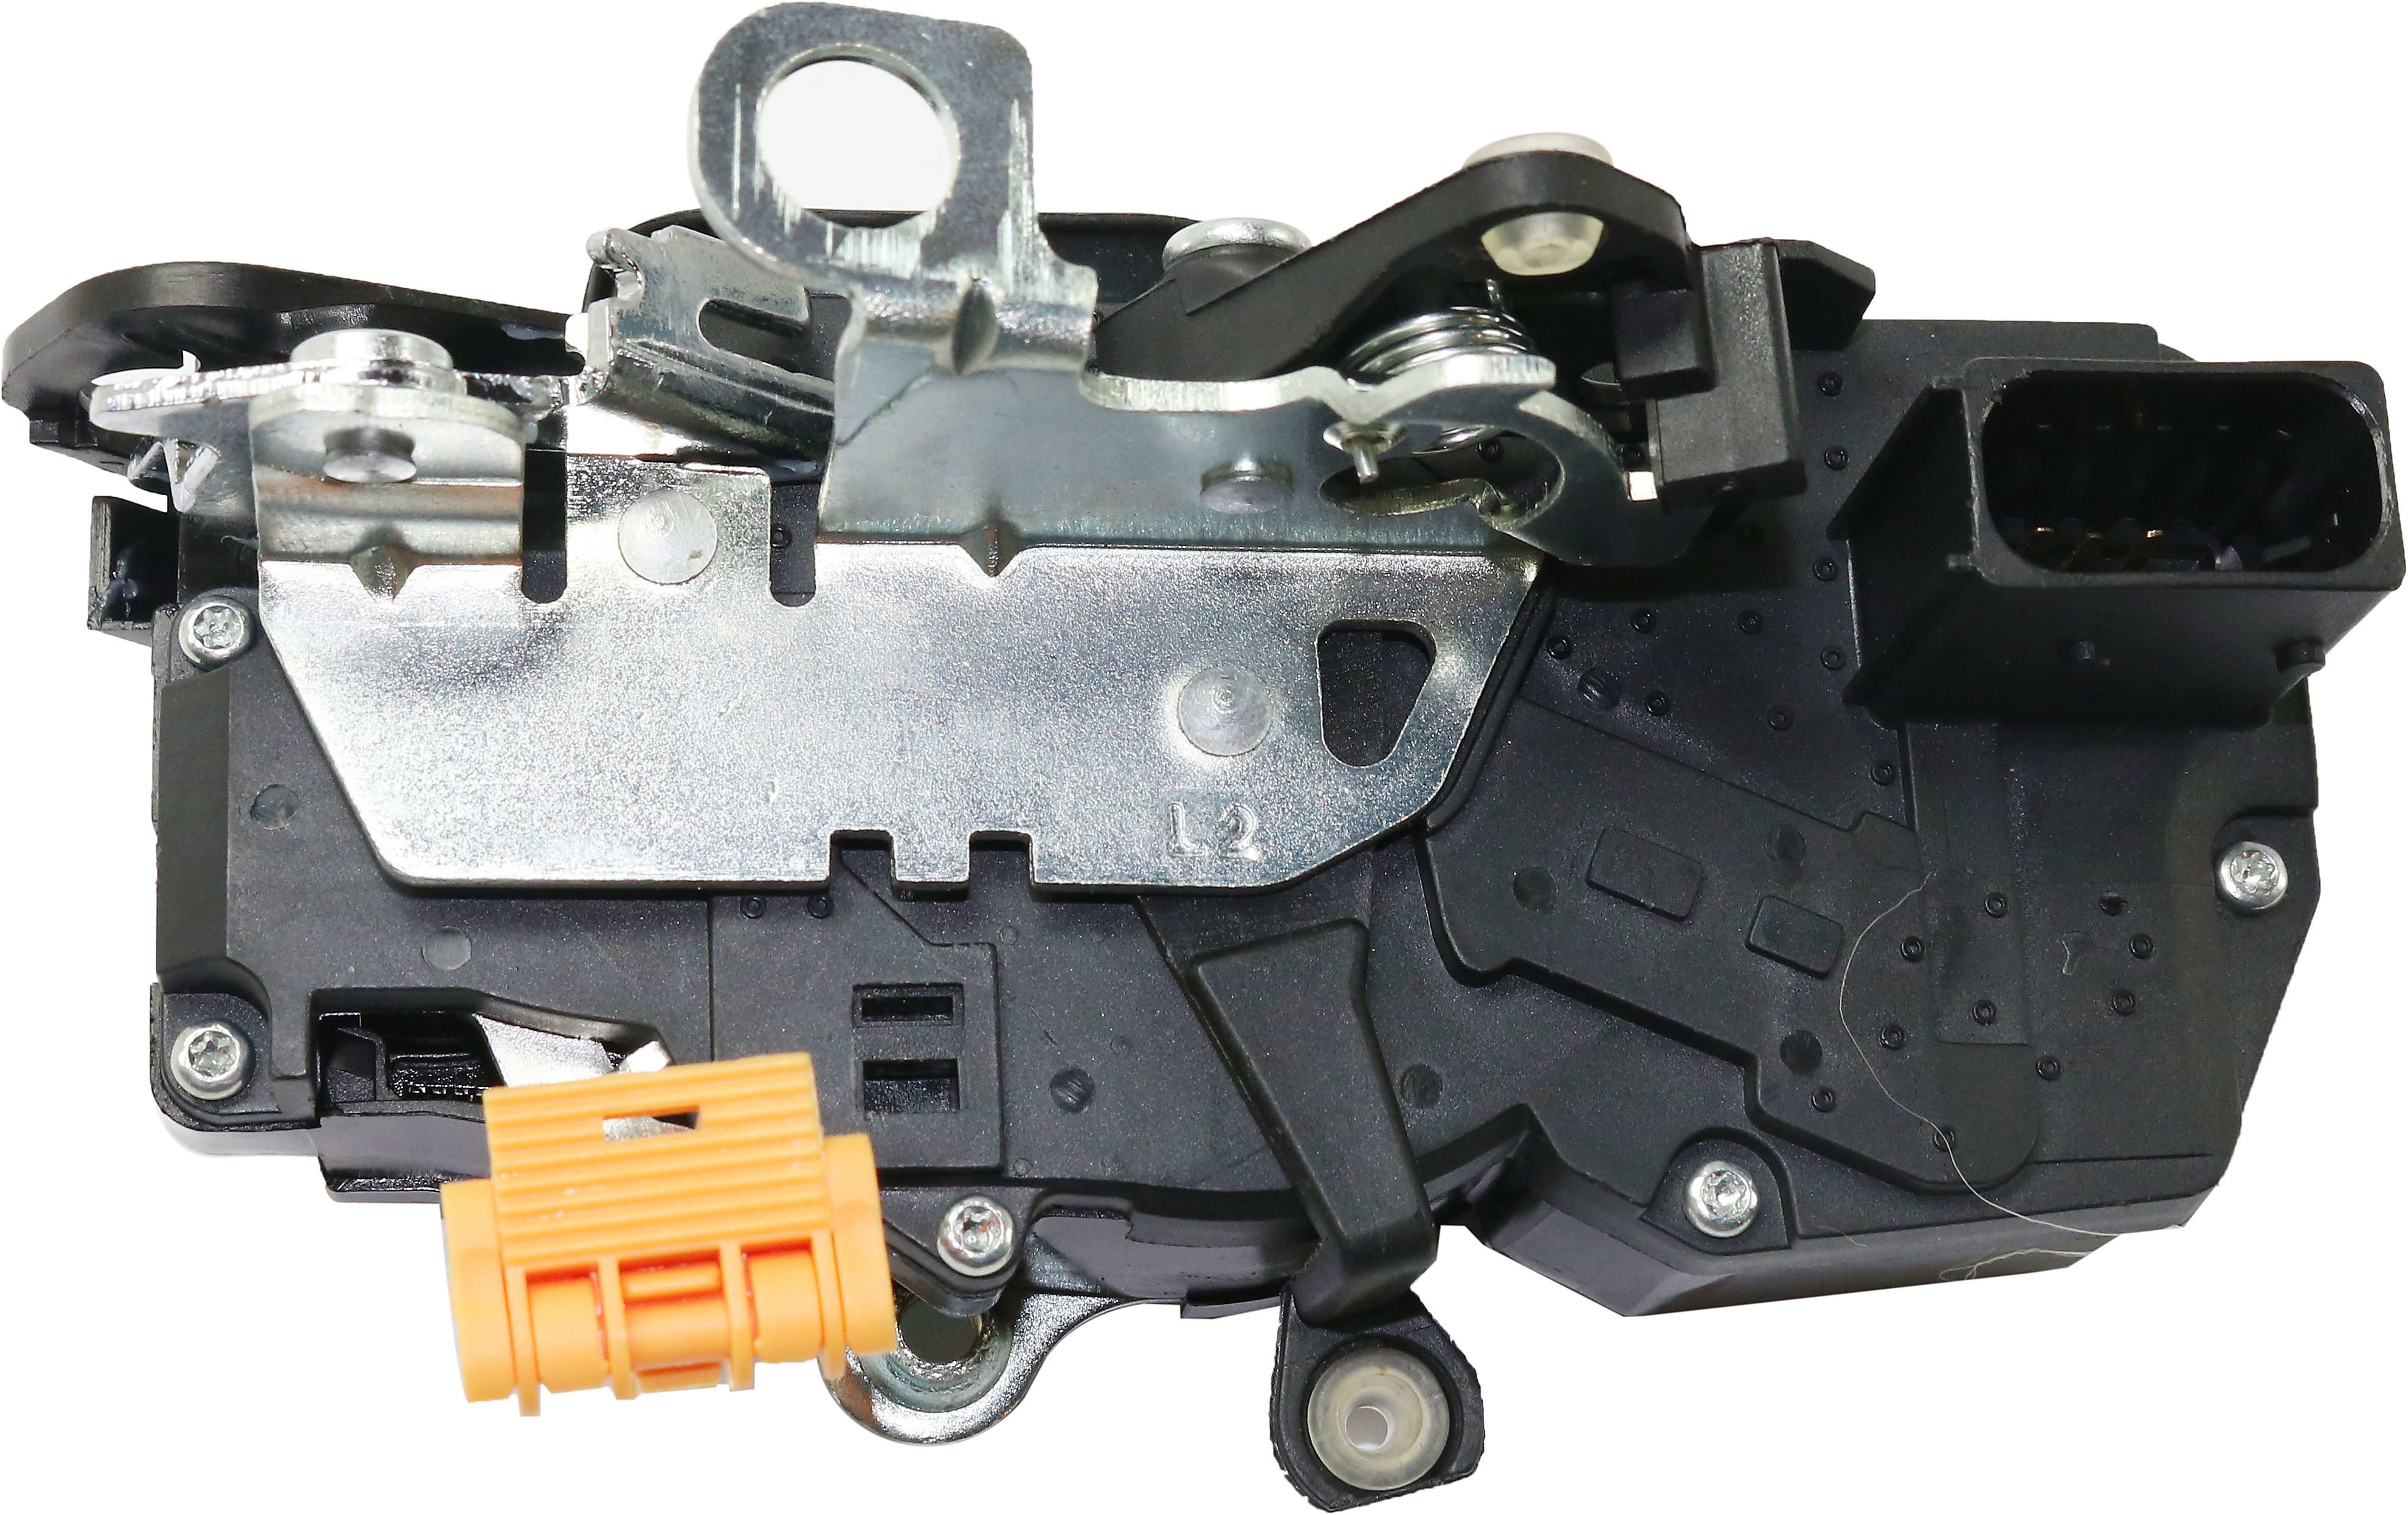 ECCPP Fits for 2005-2009 Buick Allure 2005-2009 Buick Lacrosse Front Right Door Lock Latch and Actuator 931-313 124075-5211-2007576531 